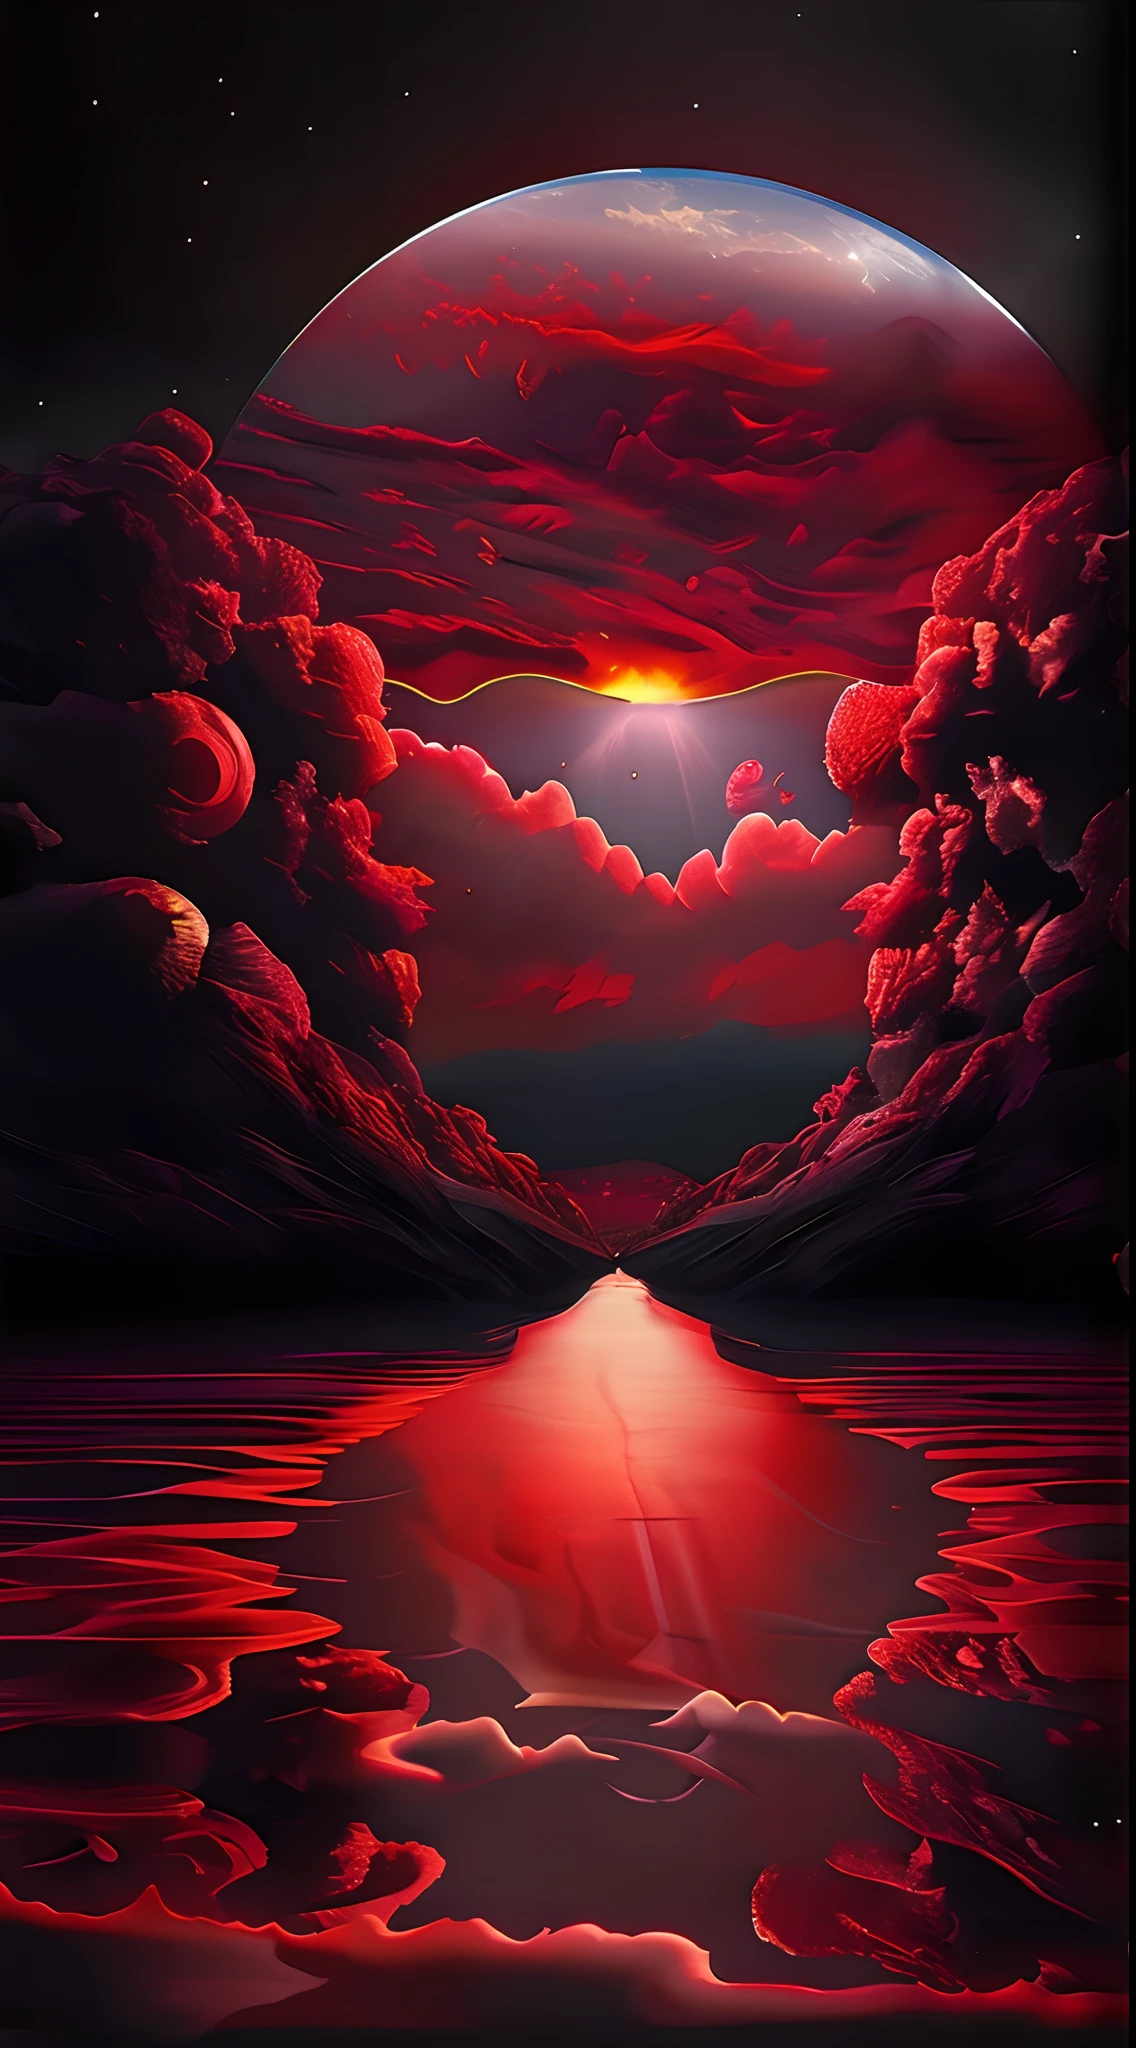 "A masterpiece of surrealism. Superior quality. Surprising detail. Surreal CG rendering，The crimson moon rises over the tranquil lake surrounded by red clouds, Autoiluminado, Large areas of clouds and fog in bright tones, celestial lighting, Space Lighting, Experience the fusion of abstract and realistic elements. Cores vibrantes e contrastantes. mystical ambiance. Surrealist techniques in the representation of objects and figures. Organic textures and shapes. Fantastic inspiration. Surprising composition and perspective. Enter a surreal world full of surprises and emotions."